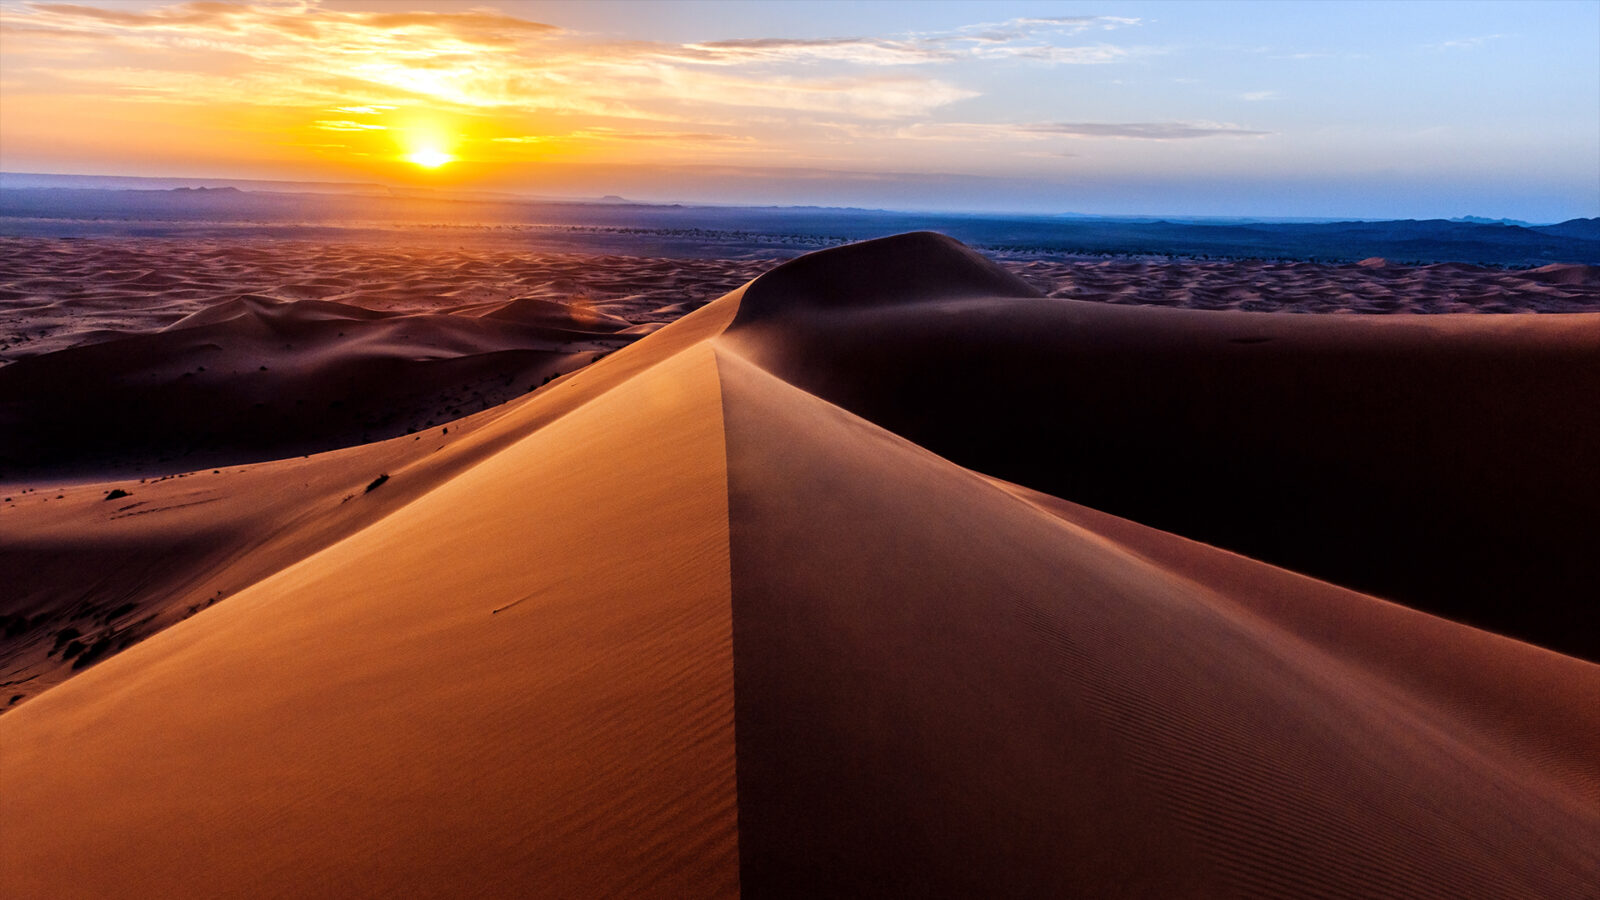 World Water Day Trivia Questions And Answers Quiz Sahara Desert star sand dune